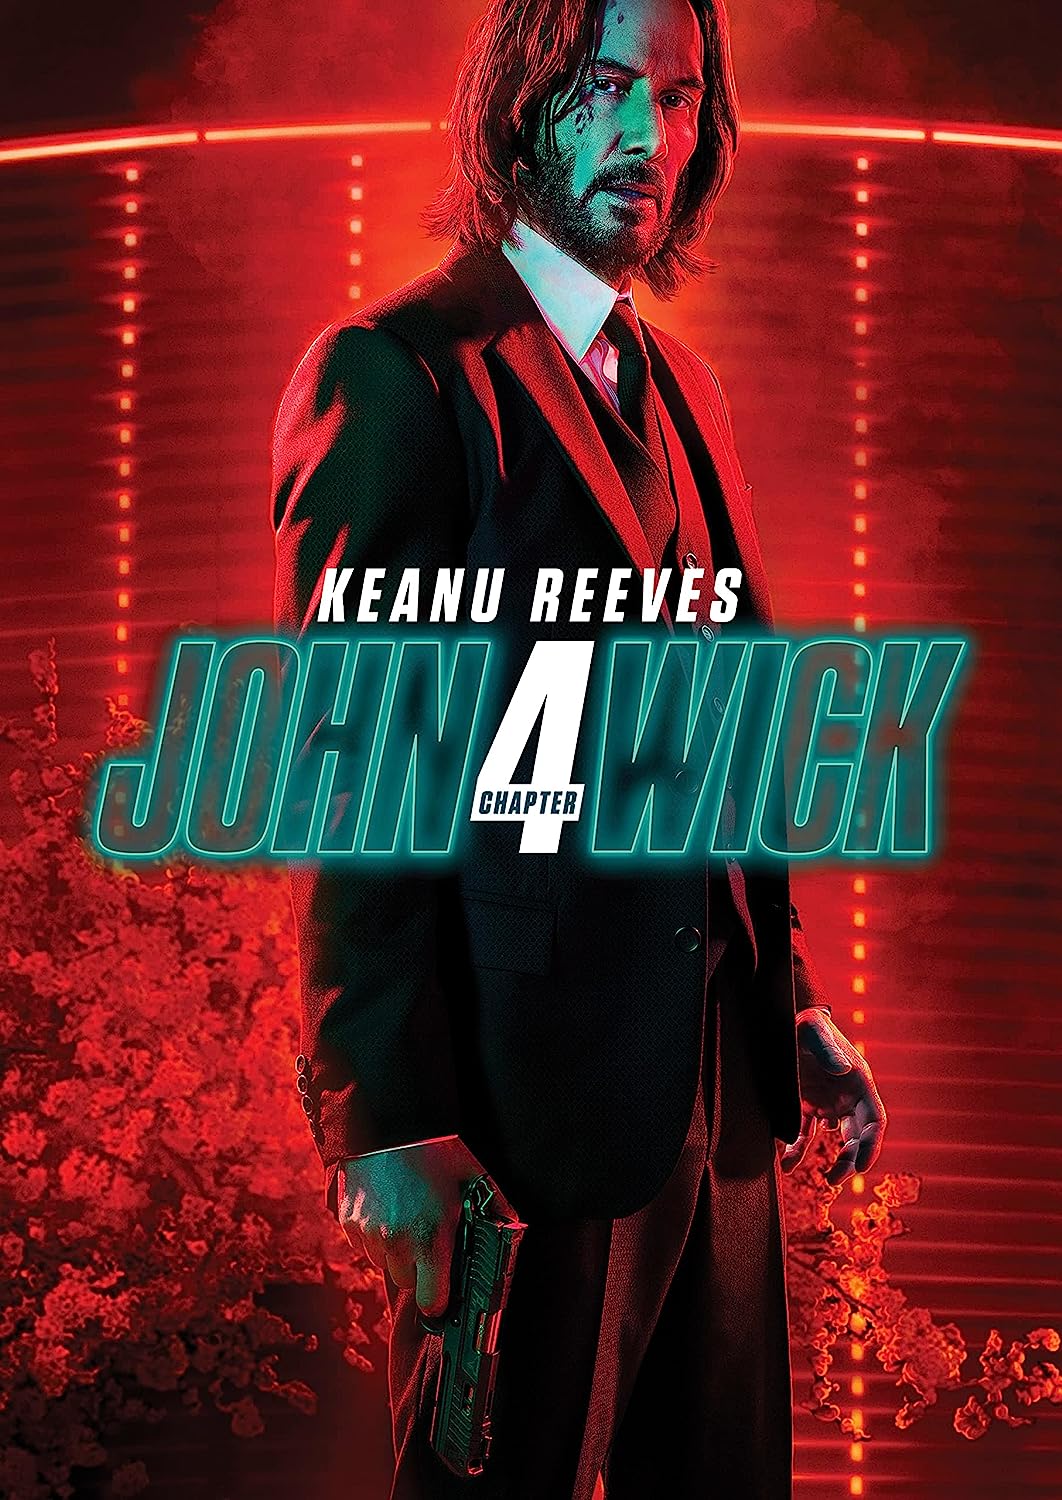 Image for "John Wick. Chapter 4"